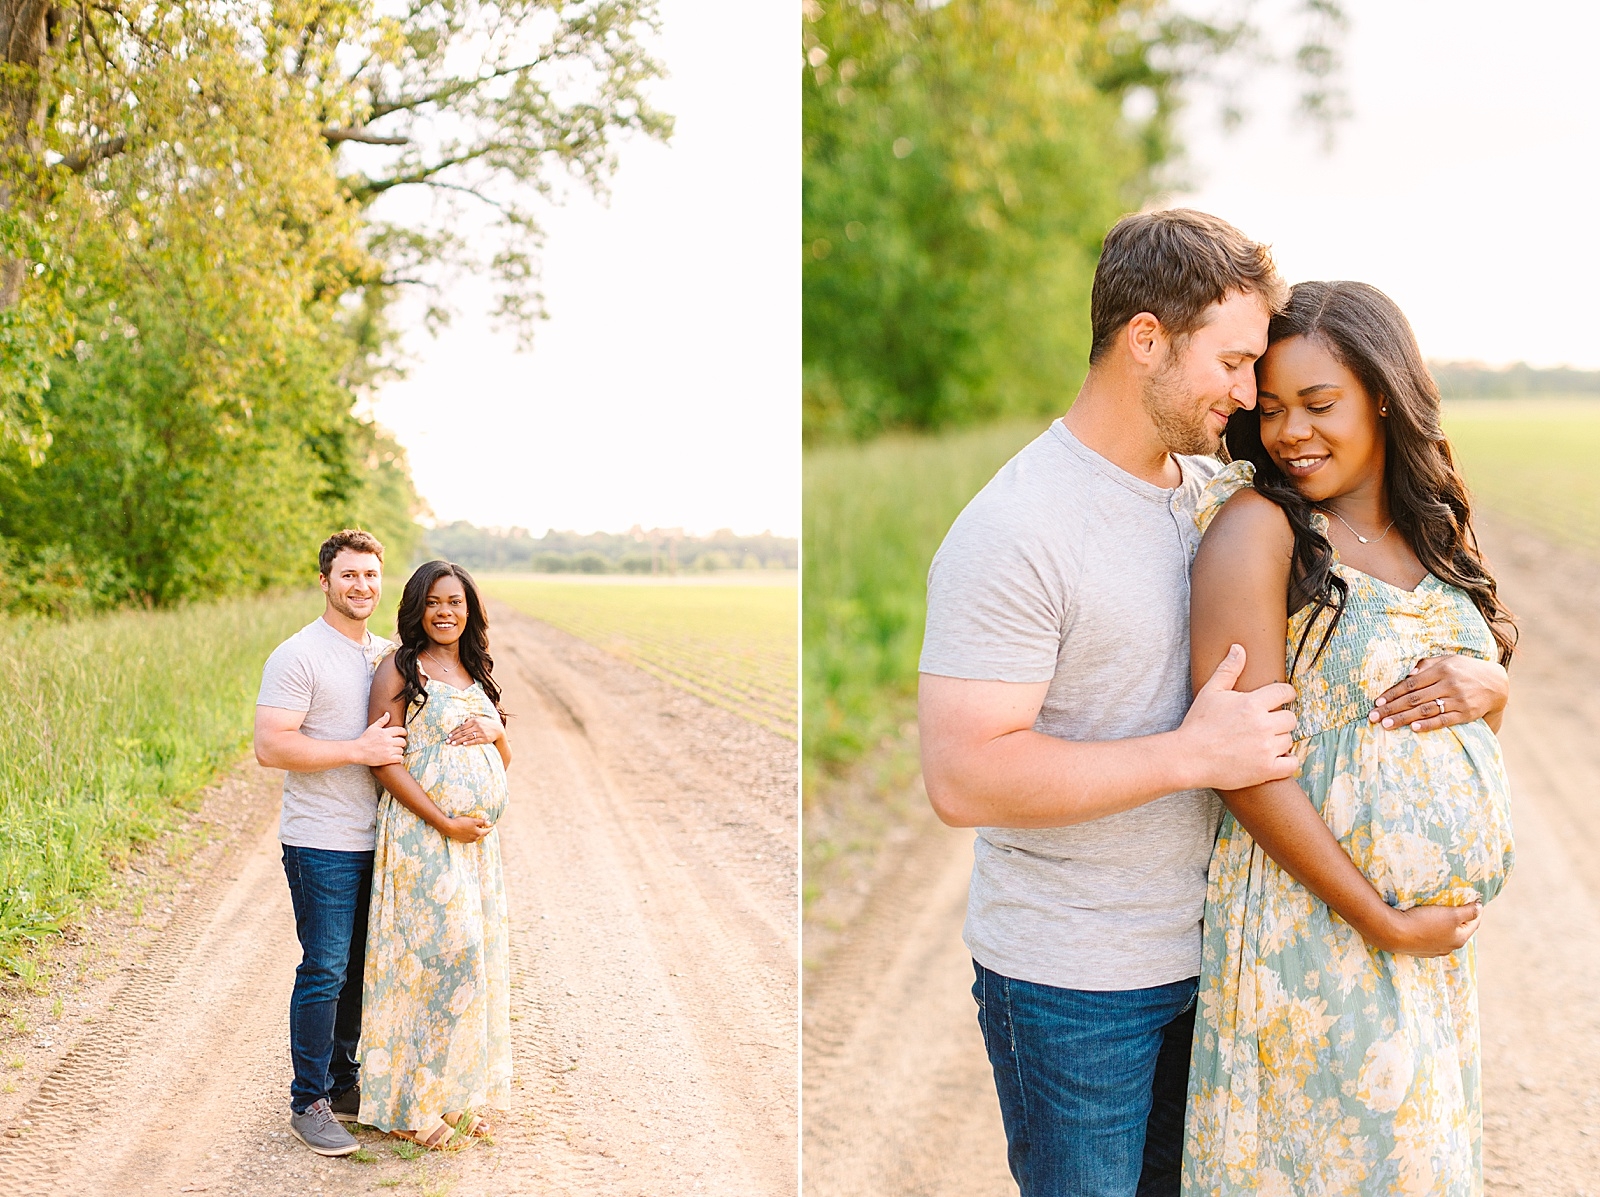 A Dreamy Rockport Indiana Maternity Session | Bret and Brandie Photography02.jpg